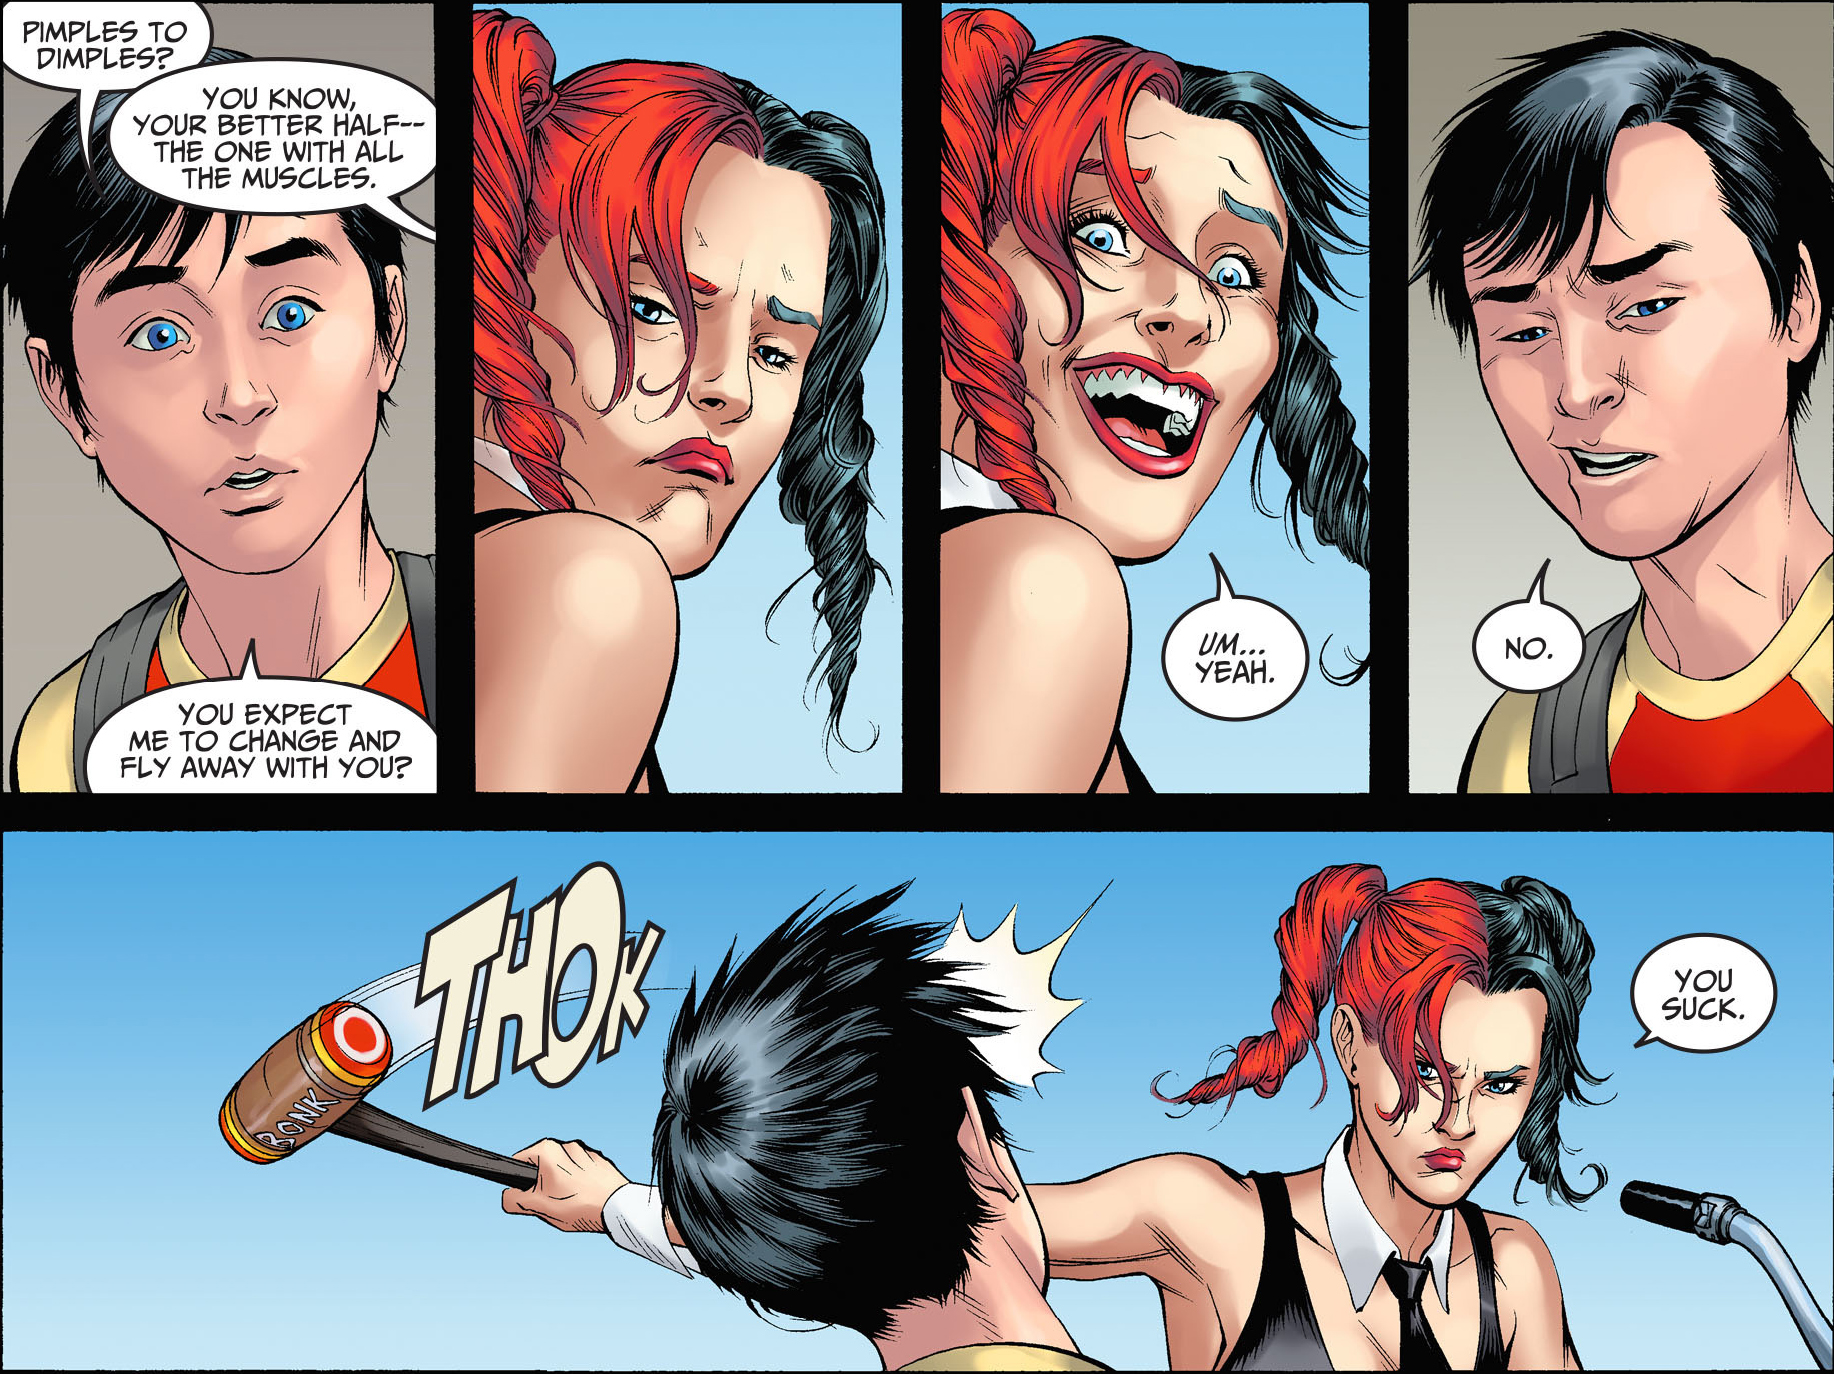 harley quinn gets billy batson out of school